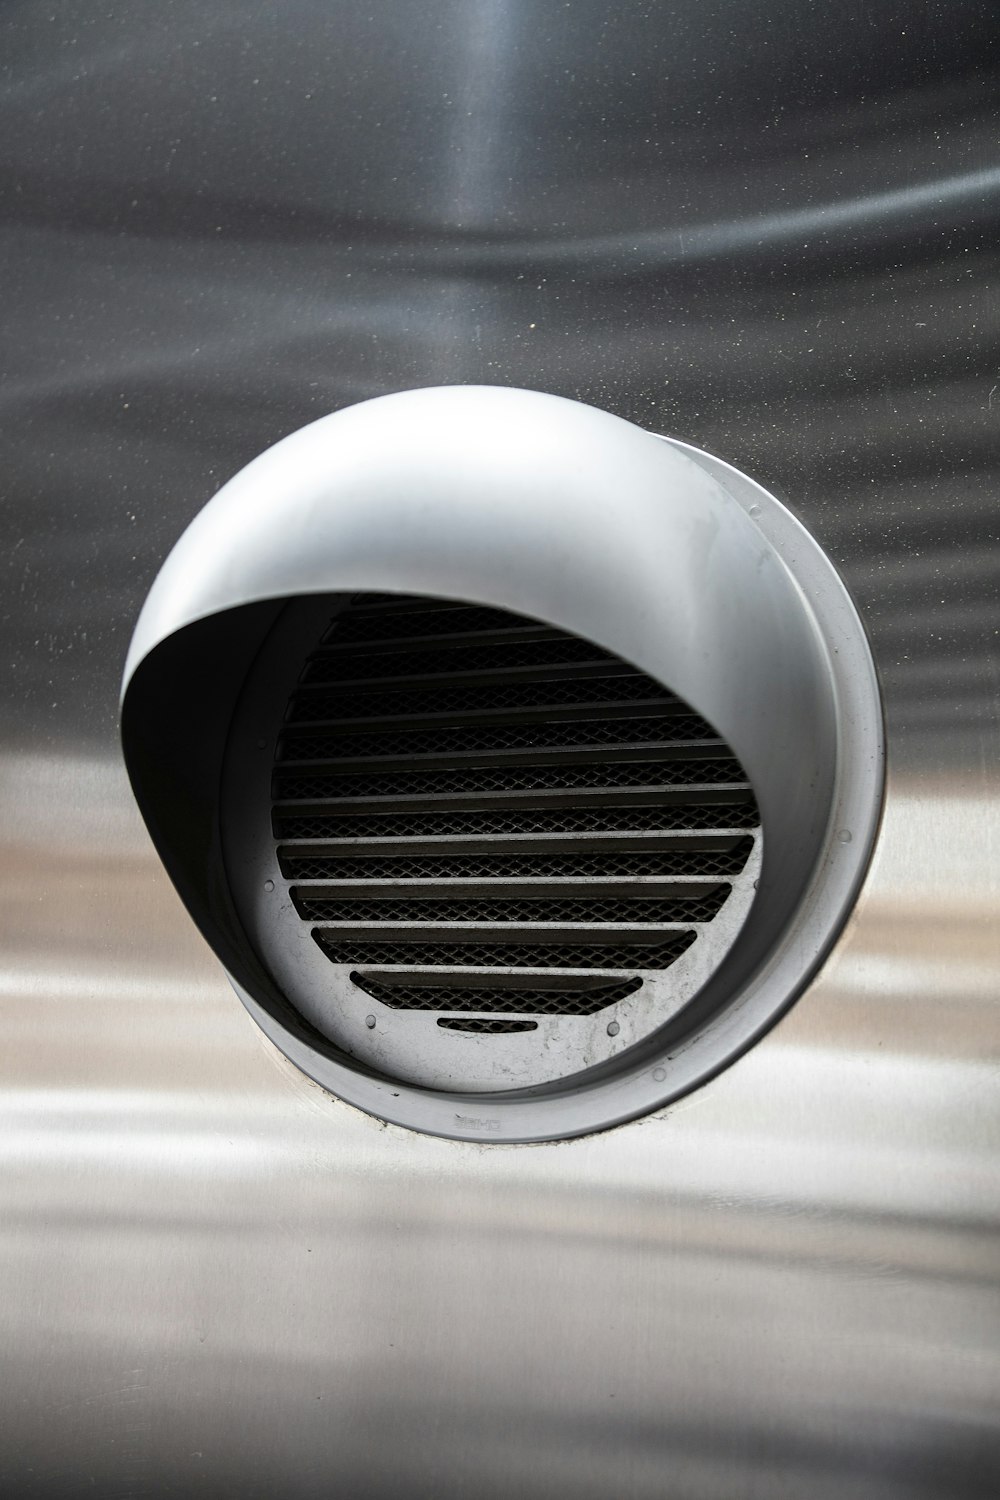 a close up of a vent on a metal surface